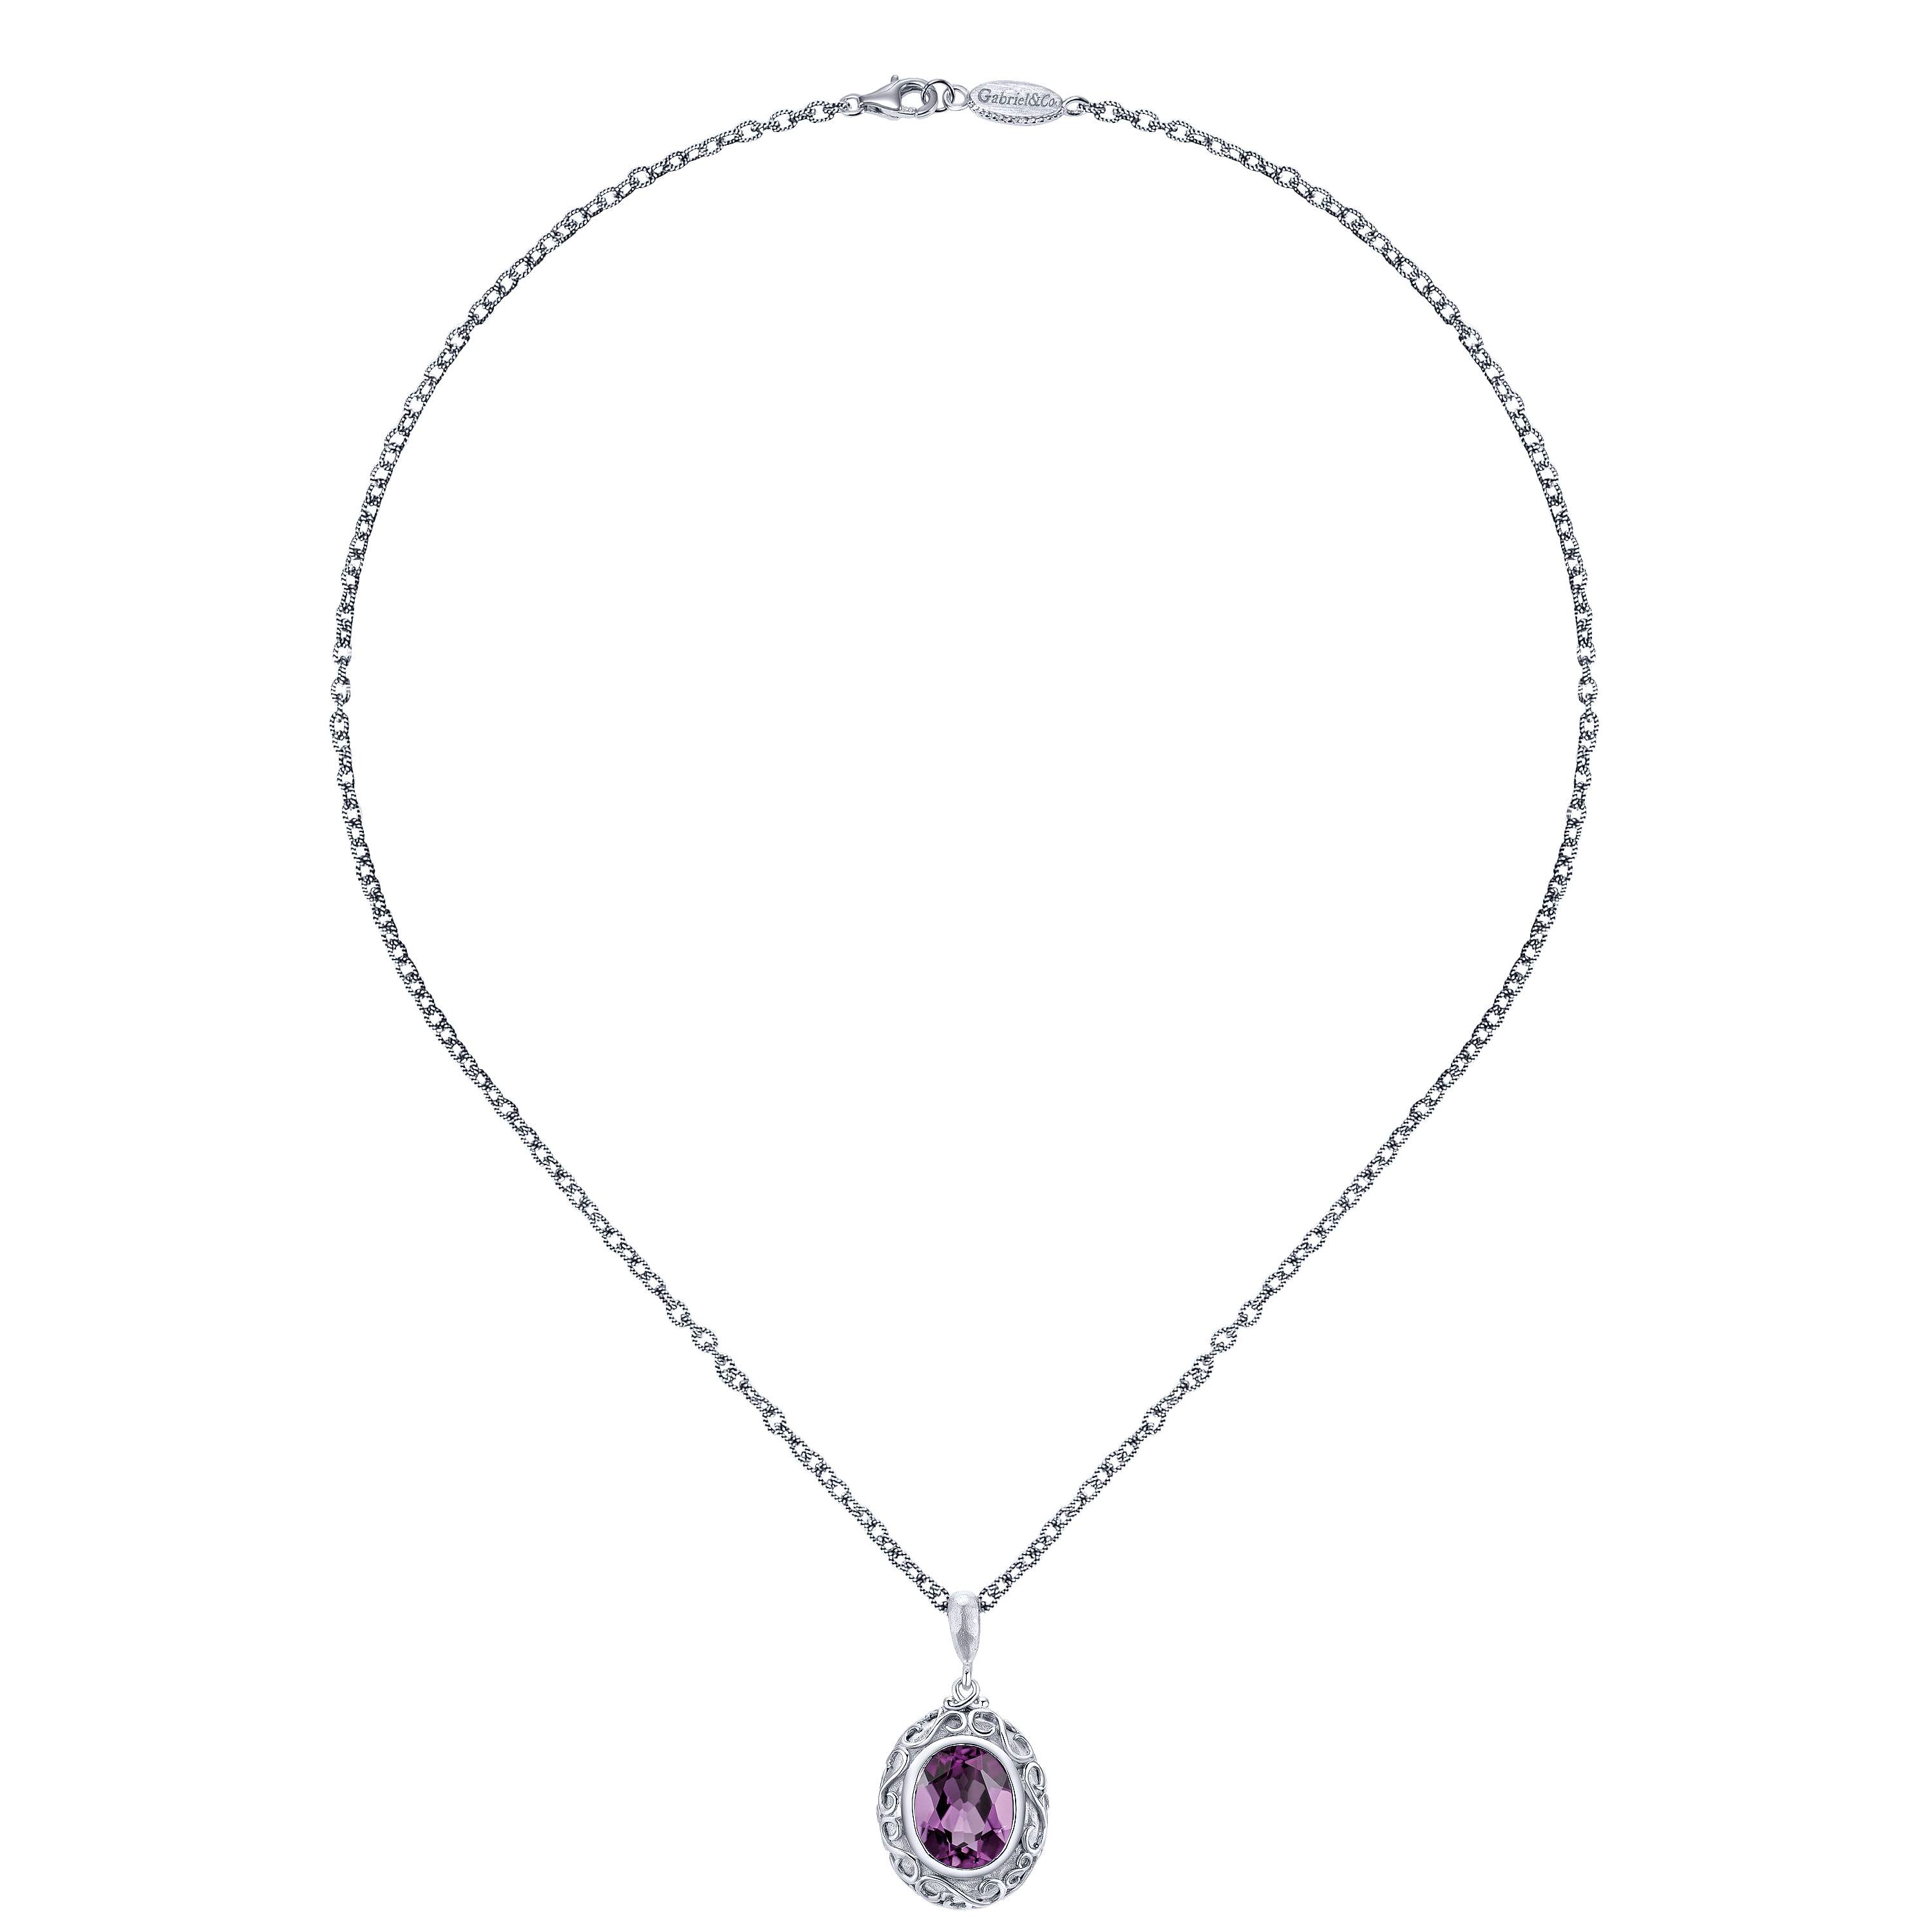 925 Sterling Silver Oval Amethyst Pendant Necklace